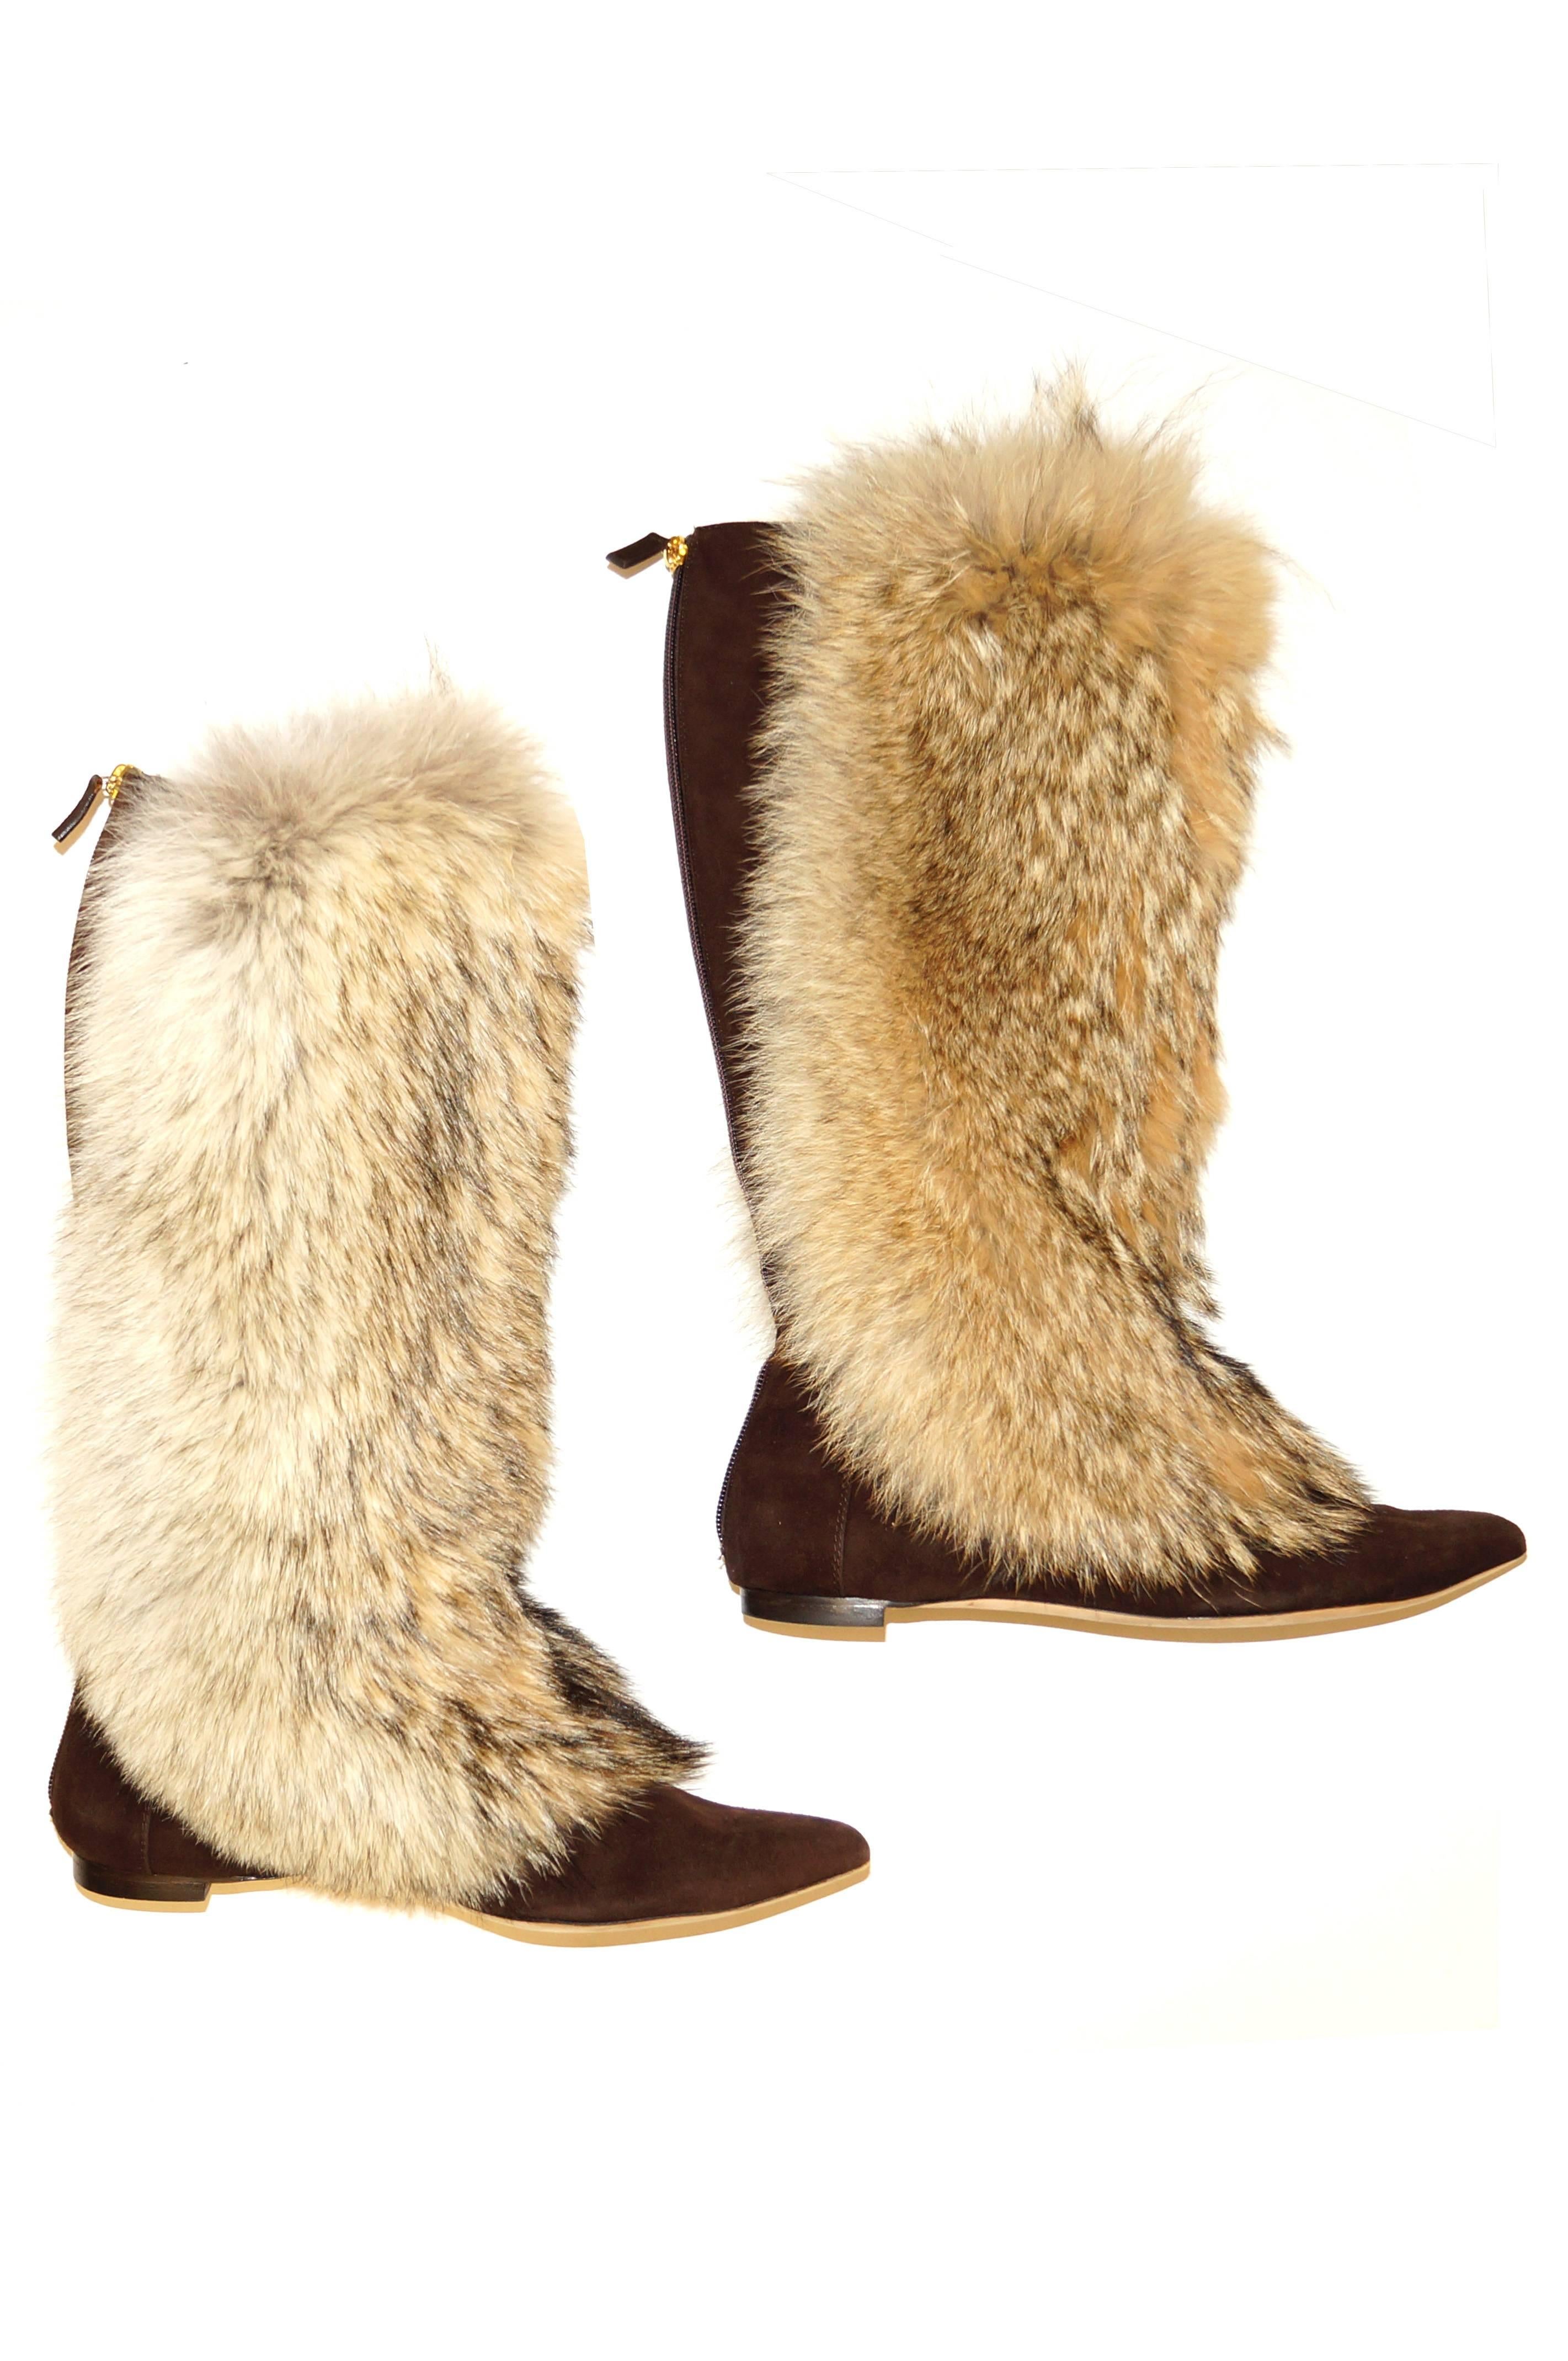 Warm, wild, and ever so wearable! These Oscar de la Renta russet brown suede boots have a lush, fluffy fur exterior covering the boot from below the knee to just past the bridge of the foot. The fur has a cream-colored base with warm grey and white